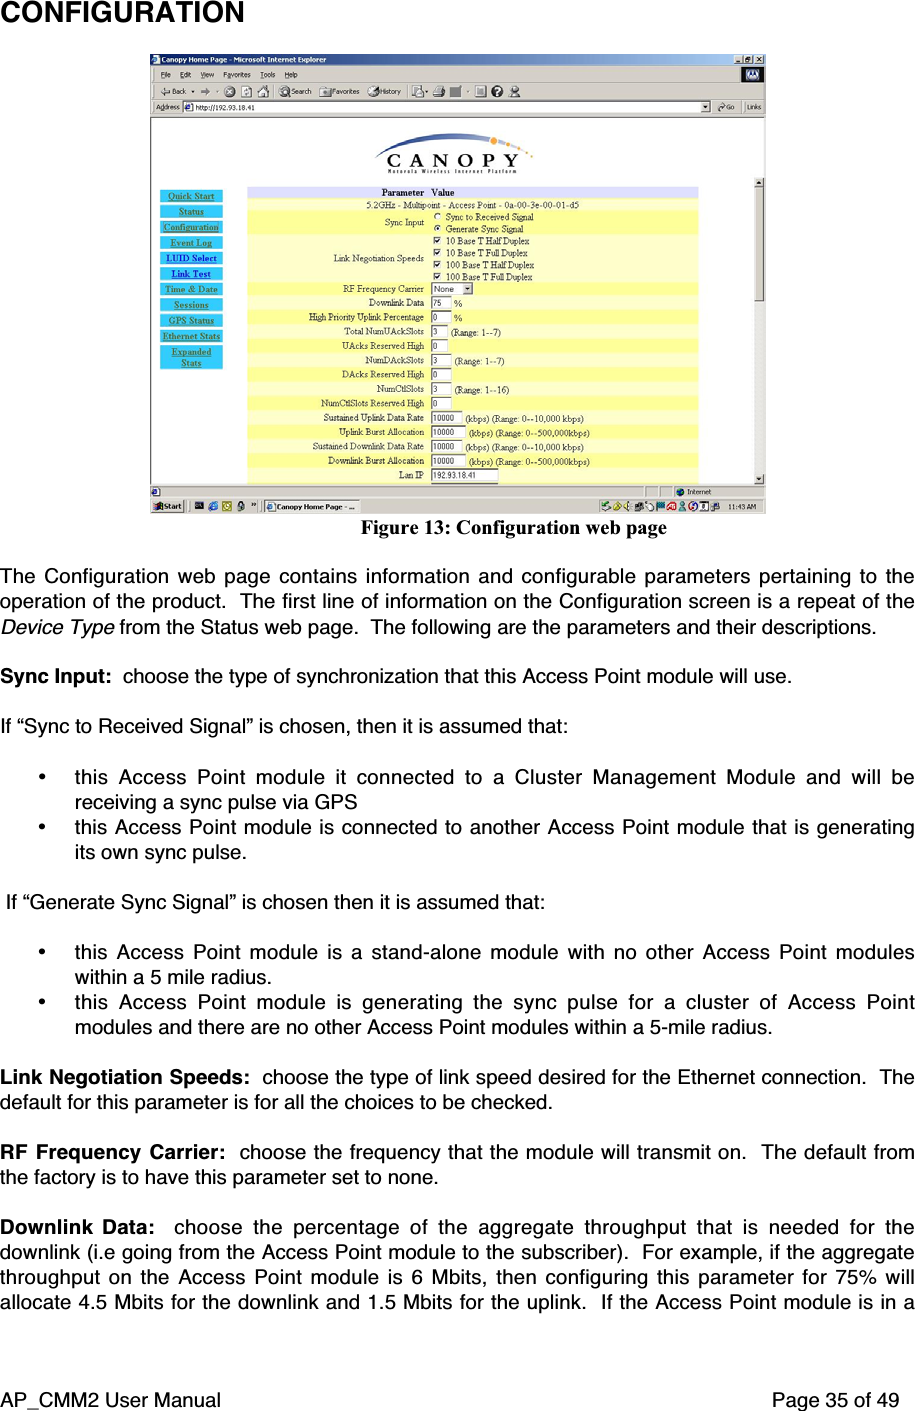 AP_CMM2 User Manual Page 35 of 49CONFIGURATIONFigure 13: Configuration web pageThe Configuration web page contains information and configurable parameters pertaining to theoperation of the product.  The first line of information on the Configuration screen is a repeat of theDevice Type from the Status web page.  The following are the parameters and their descriptions.Sync Input:  choose the type of synchronization that this Access Point module will use.If “Sync to Received Signal” is chosen, then it is assumed that:• this Access Point module it connected to a Cluster Management Module and will bereceiving a sync pulse via GPS• this Access Point module is connected to another Access Point module that is generatingits own sync pulse. If “Generate Sync Signal” is chosen then it is assumed that:• this Access Point module is a stand-alone module with no other Access Point moduleswithin a 5 mile radius.• this Access Point module is generating the sync pulse for a cluster of Access Pointmodules and there are no other Access Point modules within a 5-mile radius.Link Negotiation Speeds:  choose the type of link speed desired for the Ethernet connection.  Thedefault for this parameter is for all the choices to be checked.RF Frequency Carrier:   choose the frequency that the module will transmit on.   The default fromthe factory is to have this parameter set to none.Downlink Data:   choose the percentage of the aggregate throughput that is needed for thedownlink (i.e going from the Access Point module to the subscriber).  For example, if the aggregatethroughput on the Access Point module is 6 Mbits, then configuring this parameter for 75% willallocate 4.5 Mbits for the downlink and 1.5 Mbits for the uplink.  If the Access Point module is in a